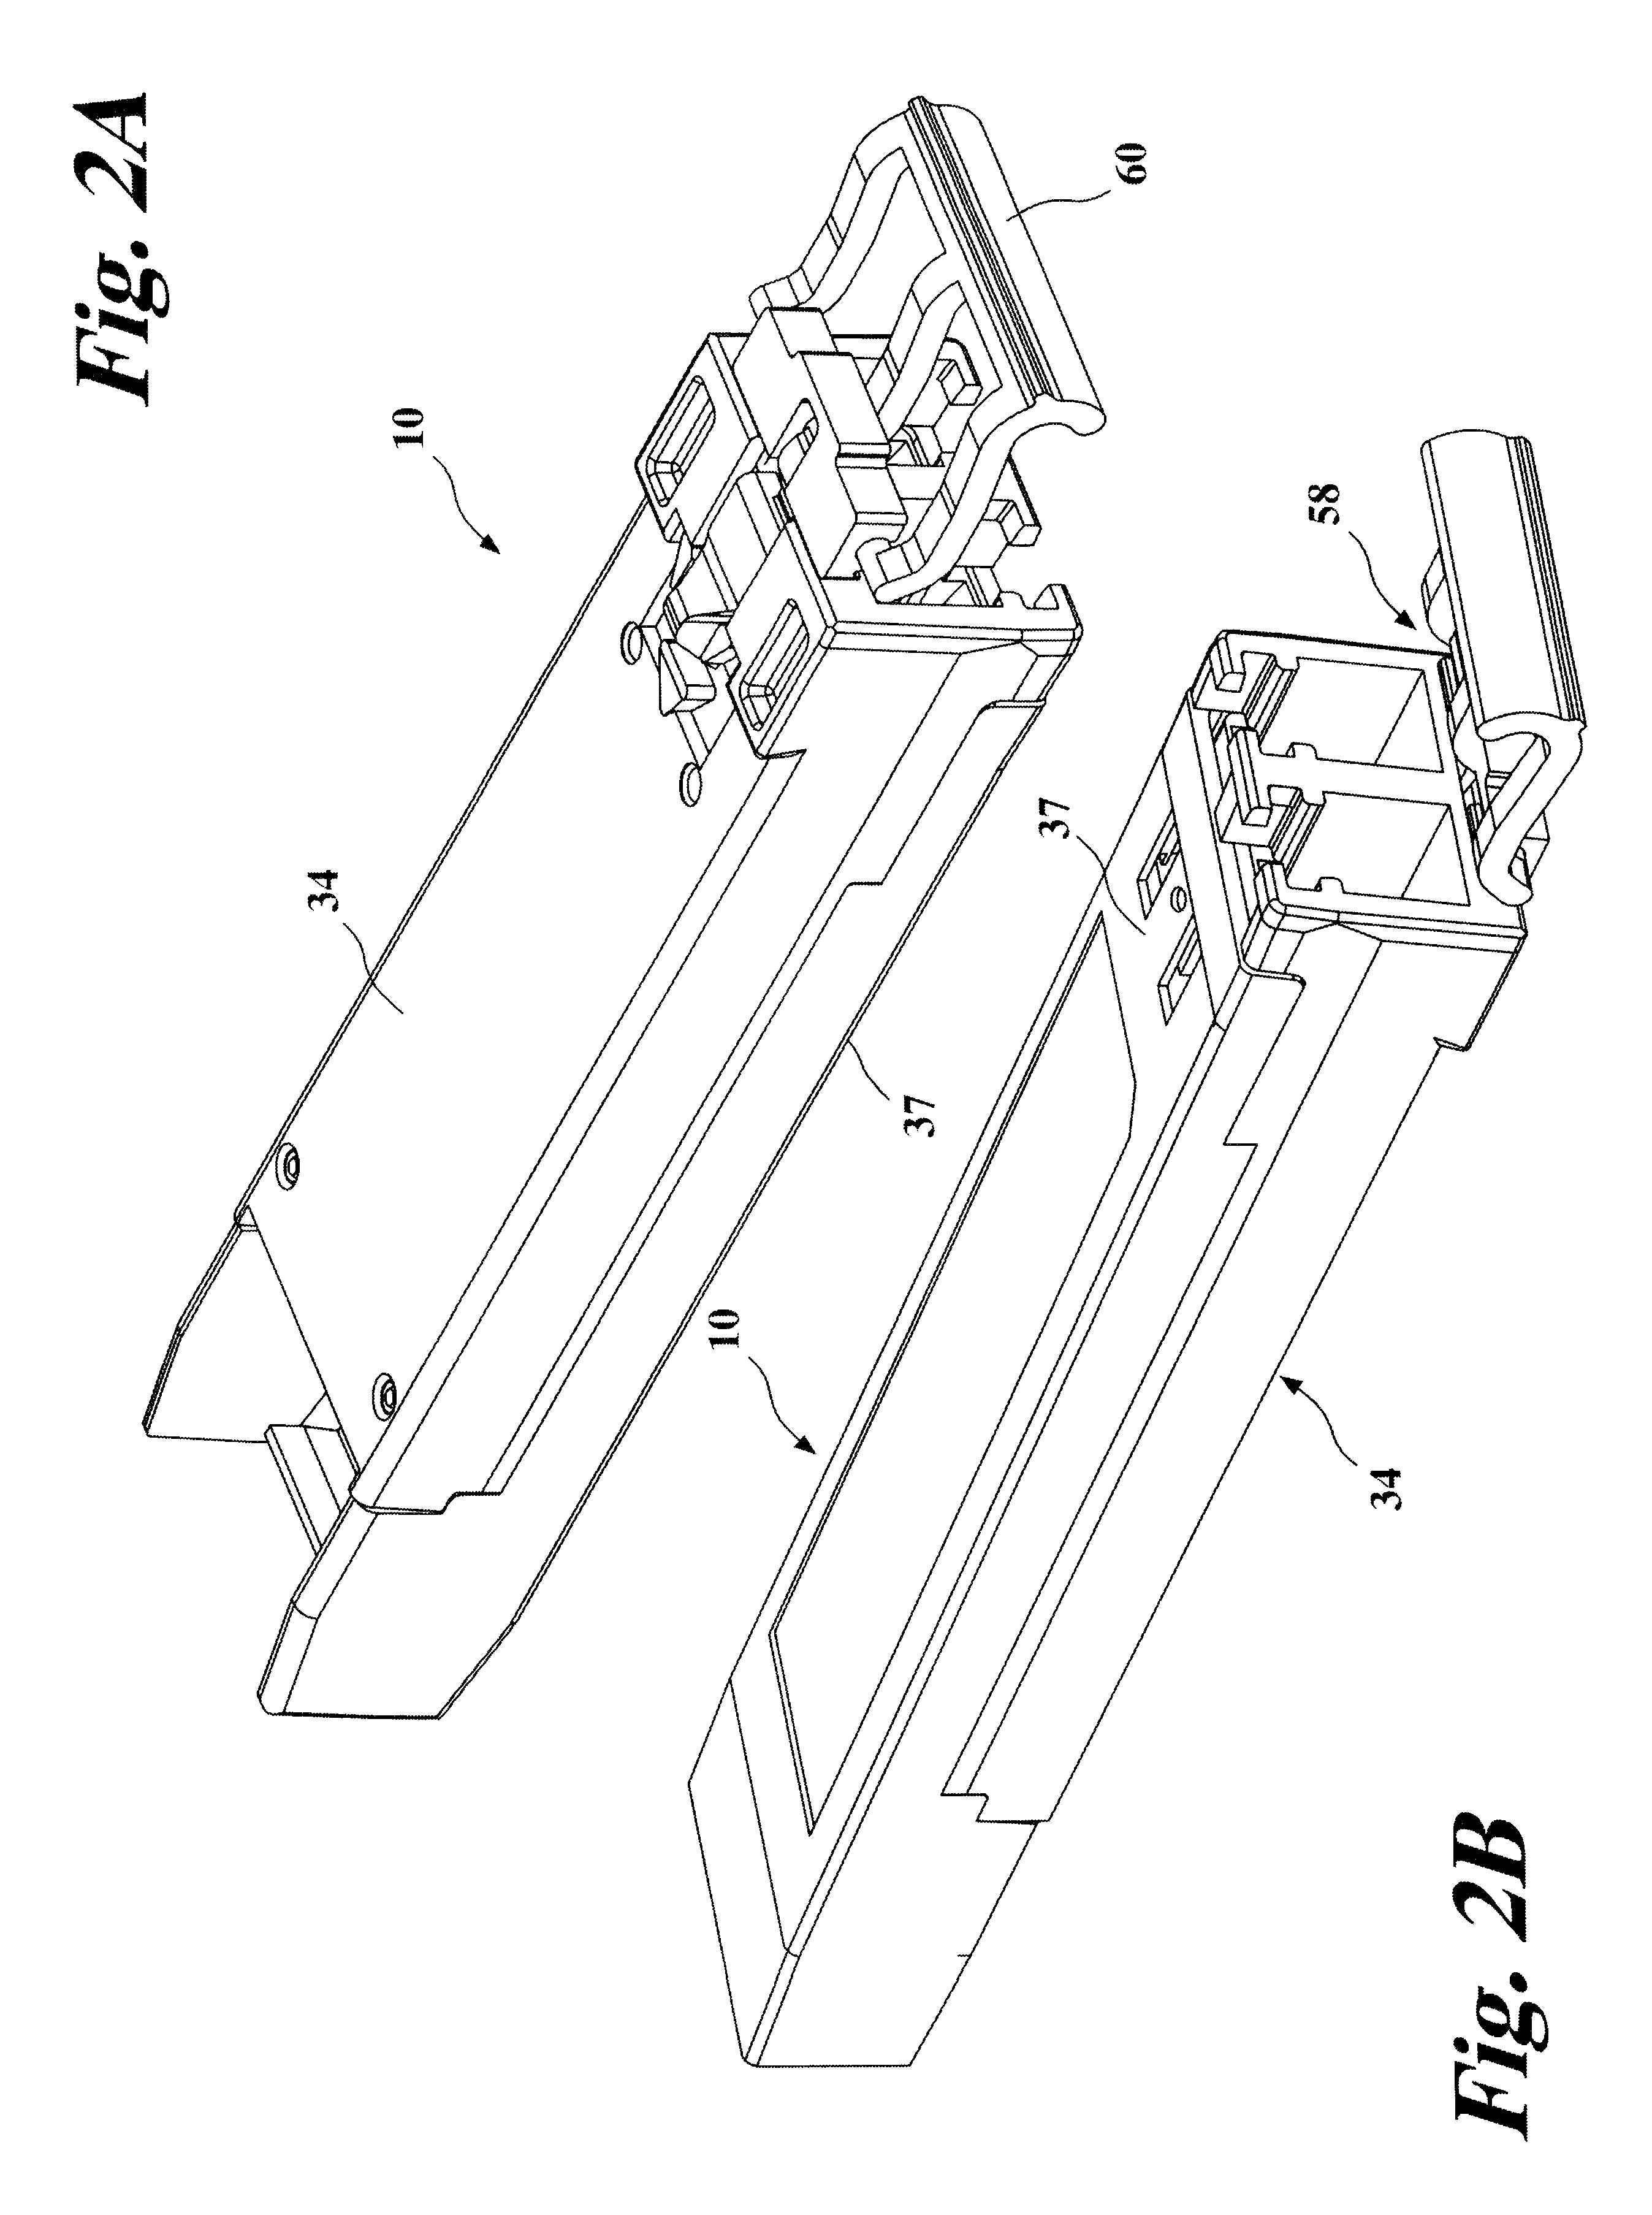 Pluggable transceiver module having rotatable release and removal lever with living hinge